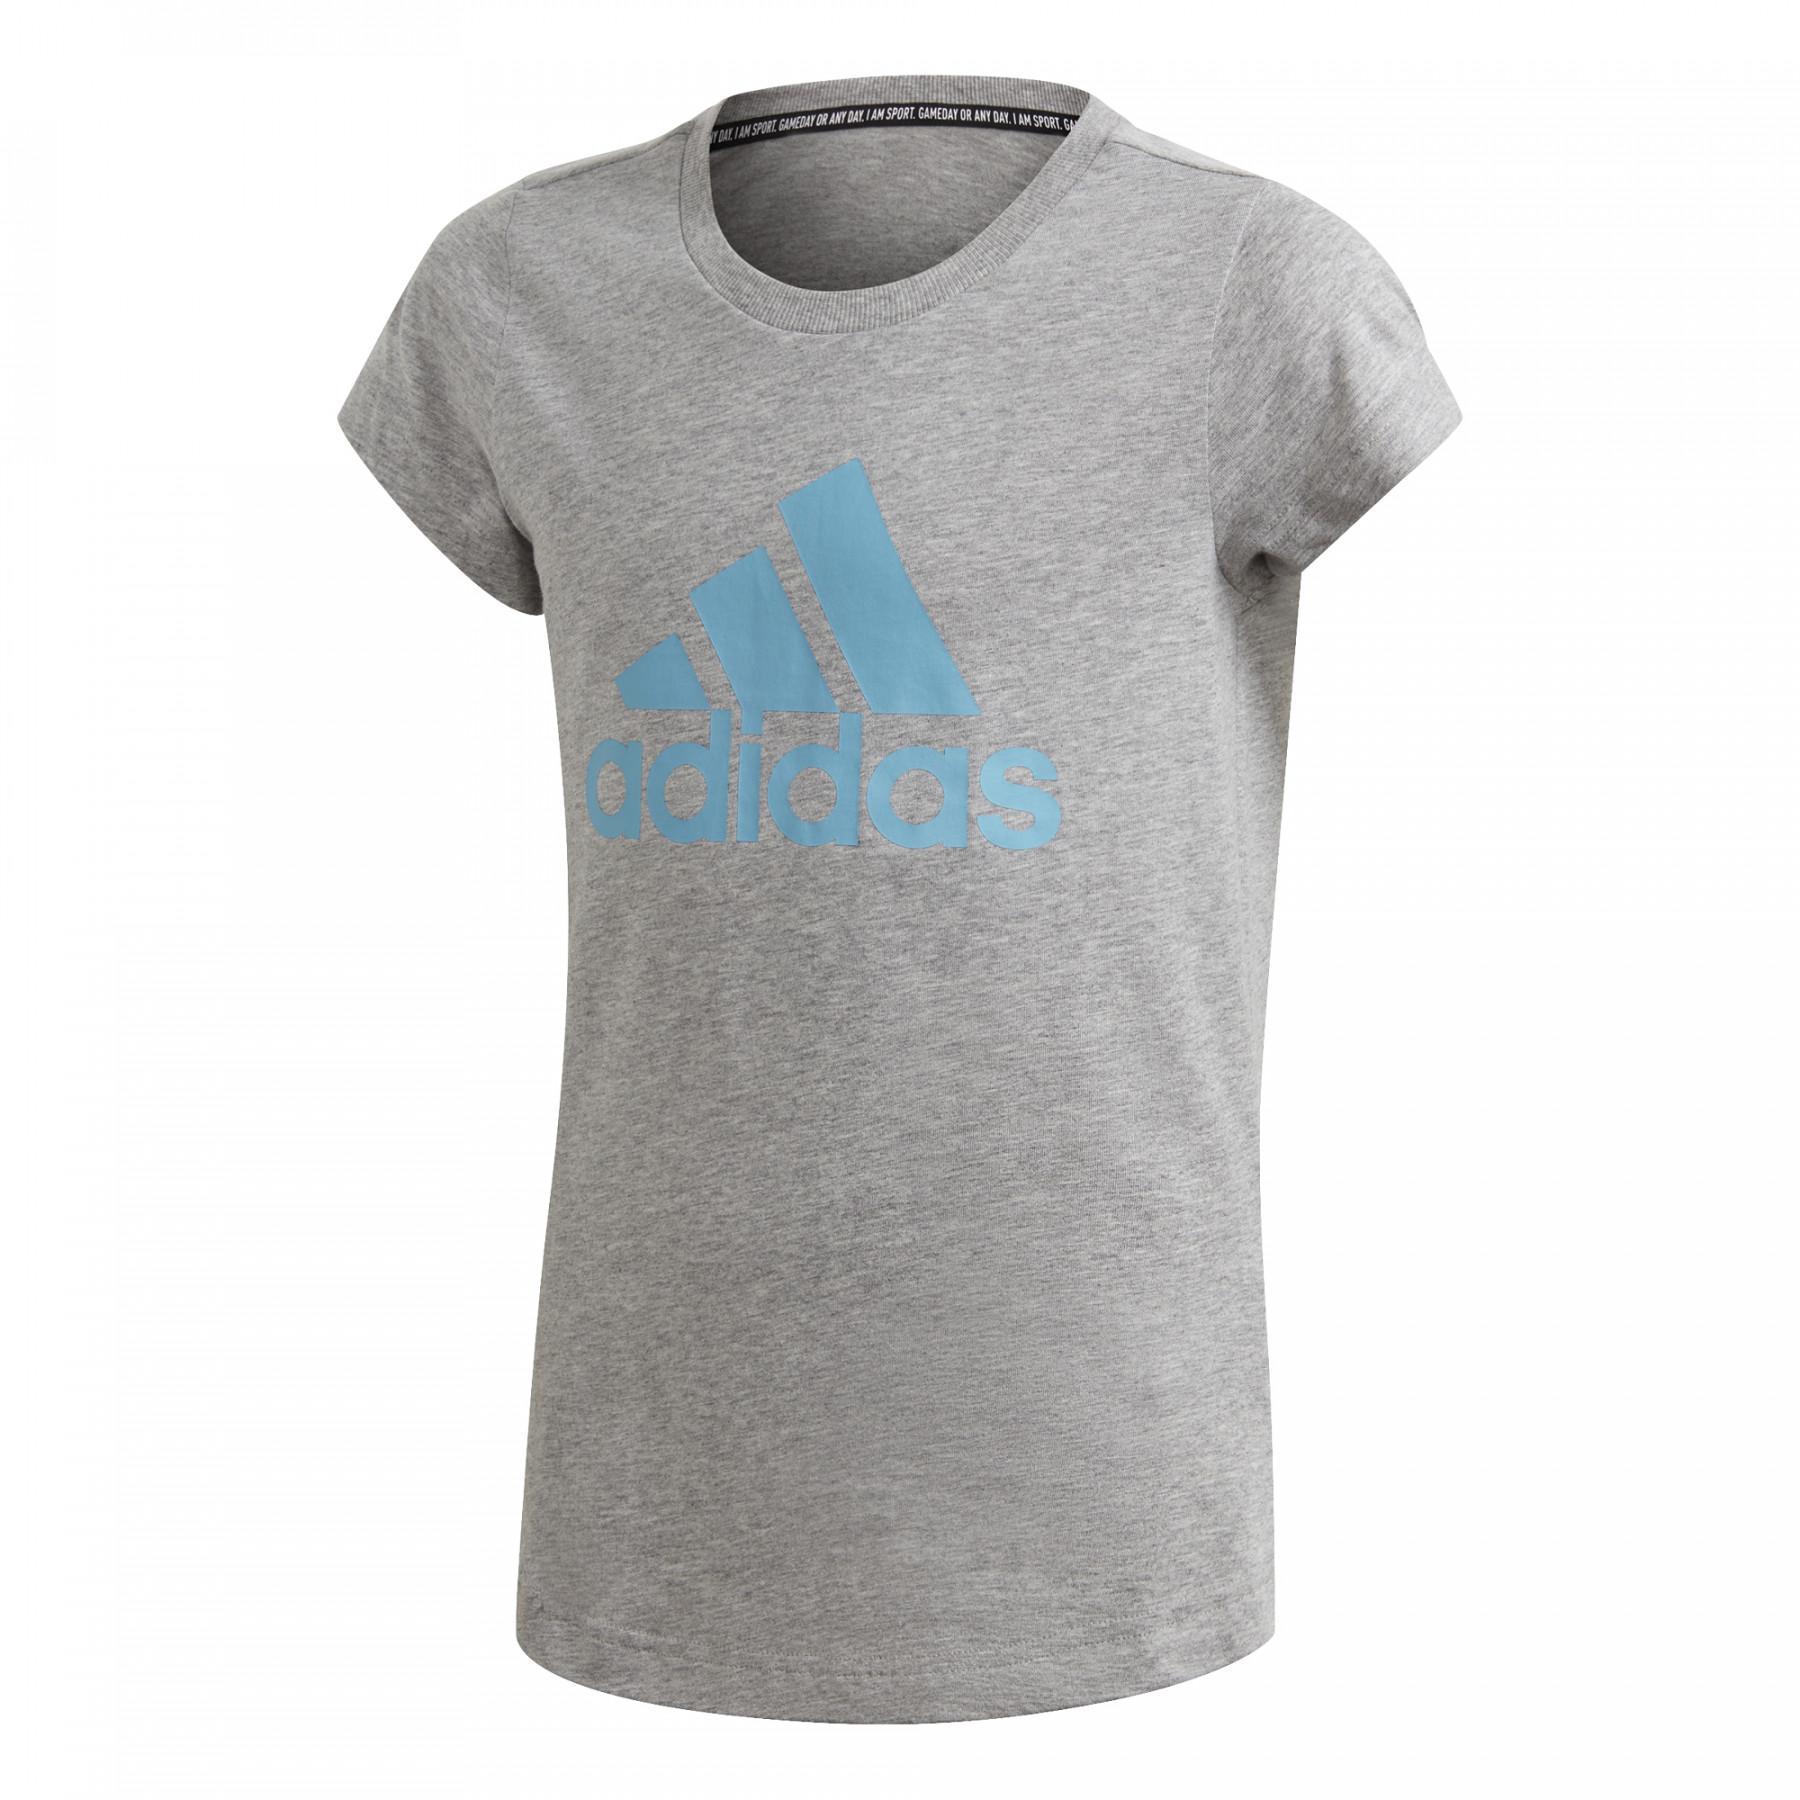 T-shirt per bambini adidas Must Haves Badge of Sport